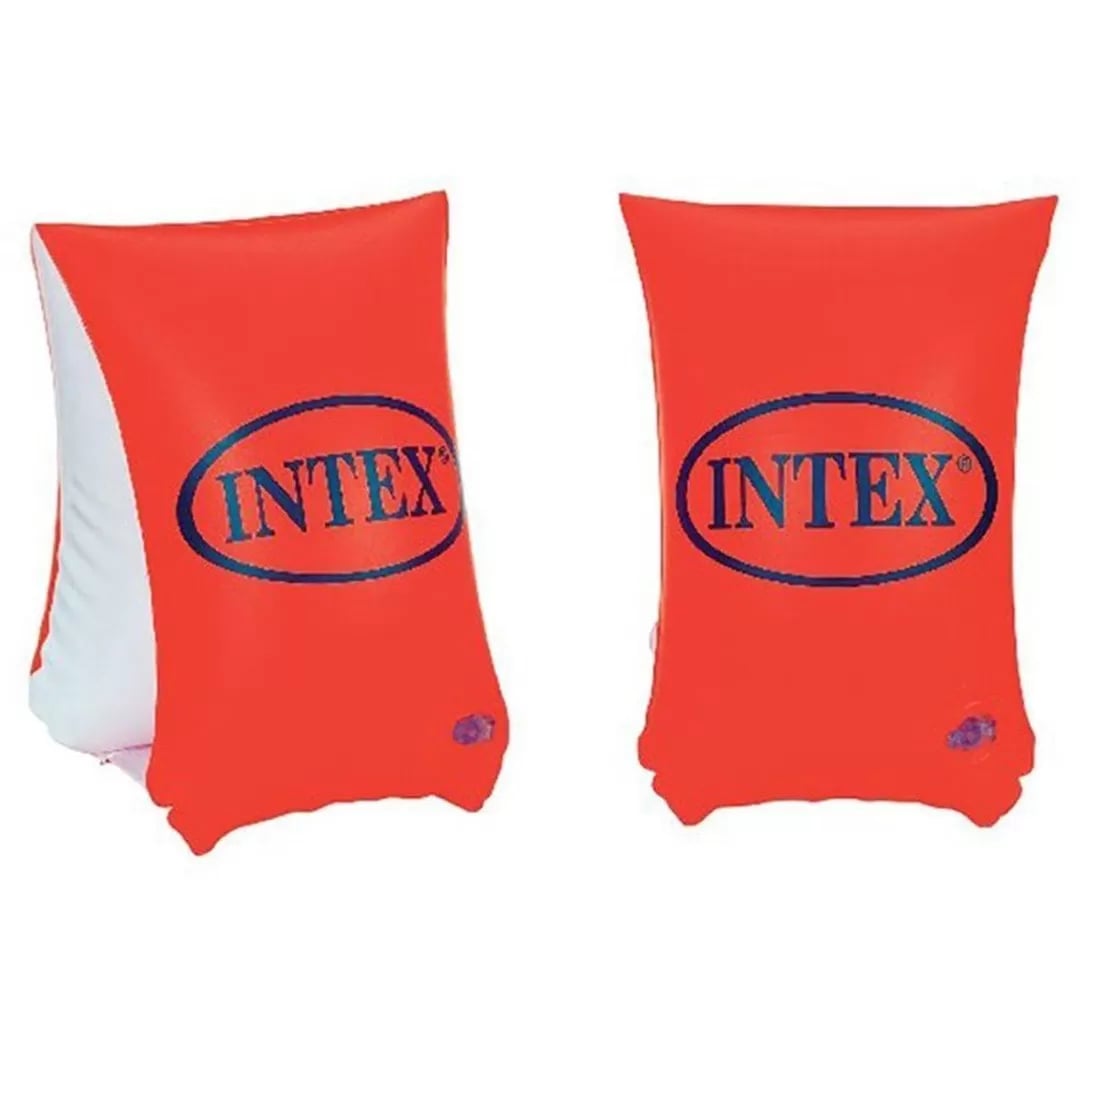 Intex Armrests Deluxe Inflatable Sea Beach Pool Games